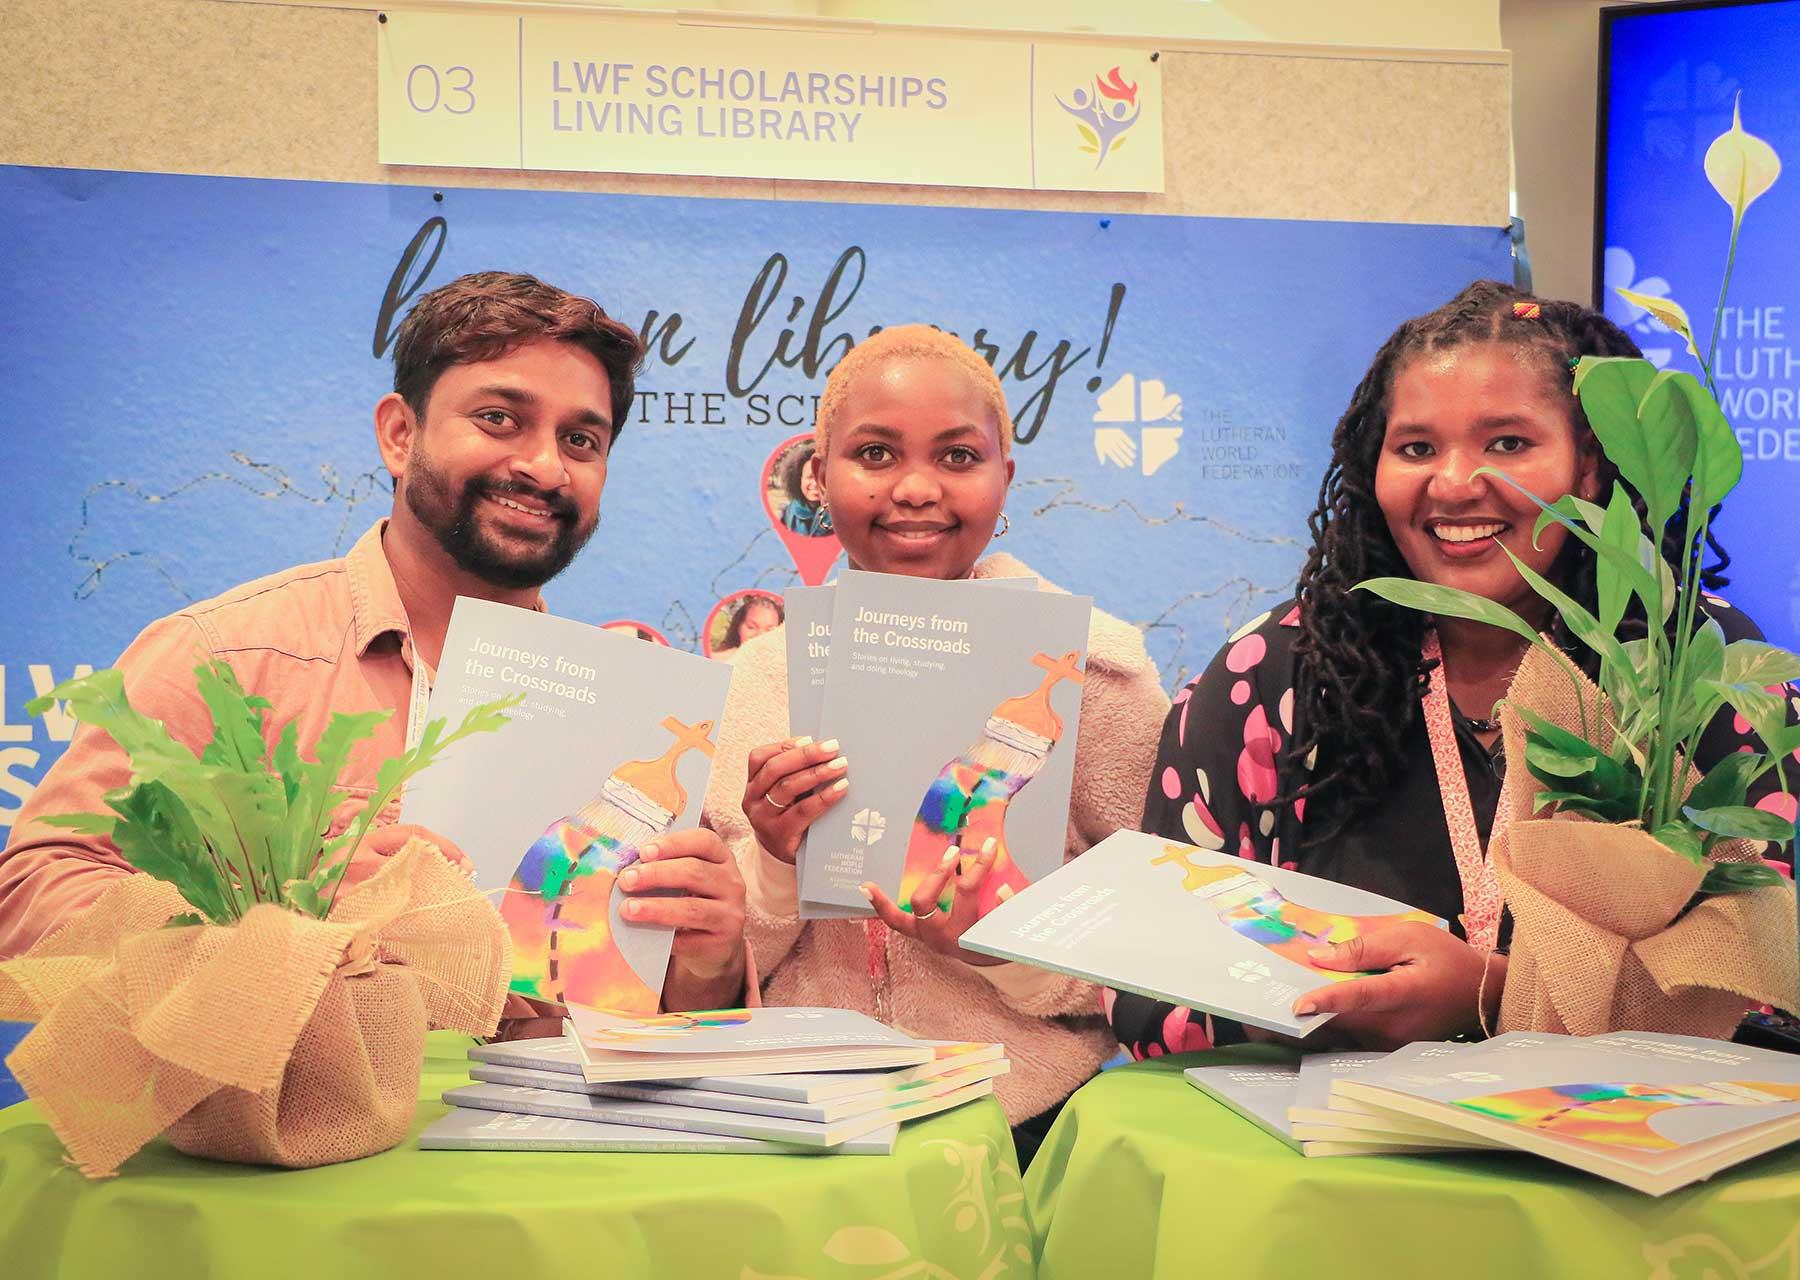 Three LWF scholarship holders at the Thirteenth Assembly in Krakow with copies of the recent publication ‘Journeys from the Crossroads’ which showcases stories on “living, studying and doing theology.” Photo: LWF/J.C. Valeriano